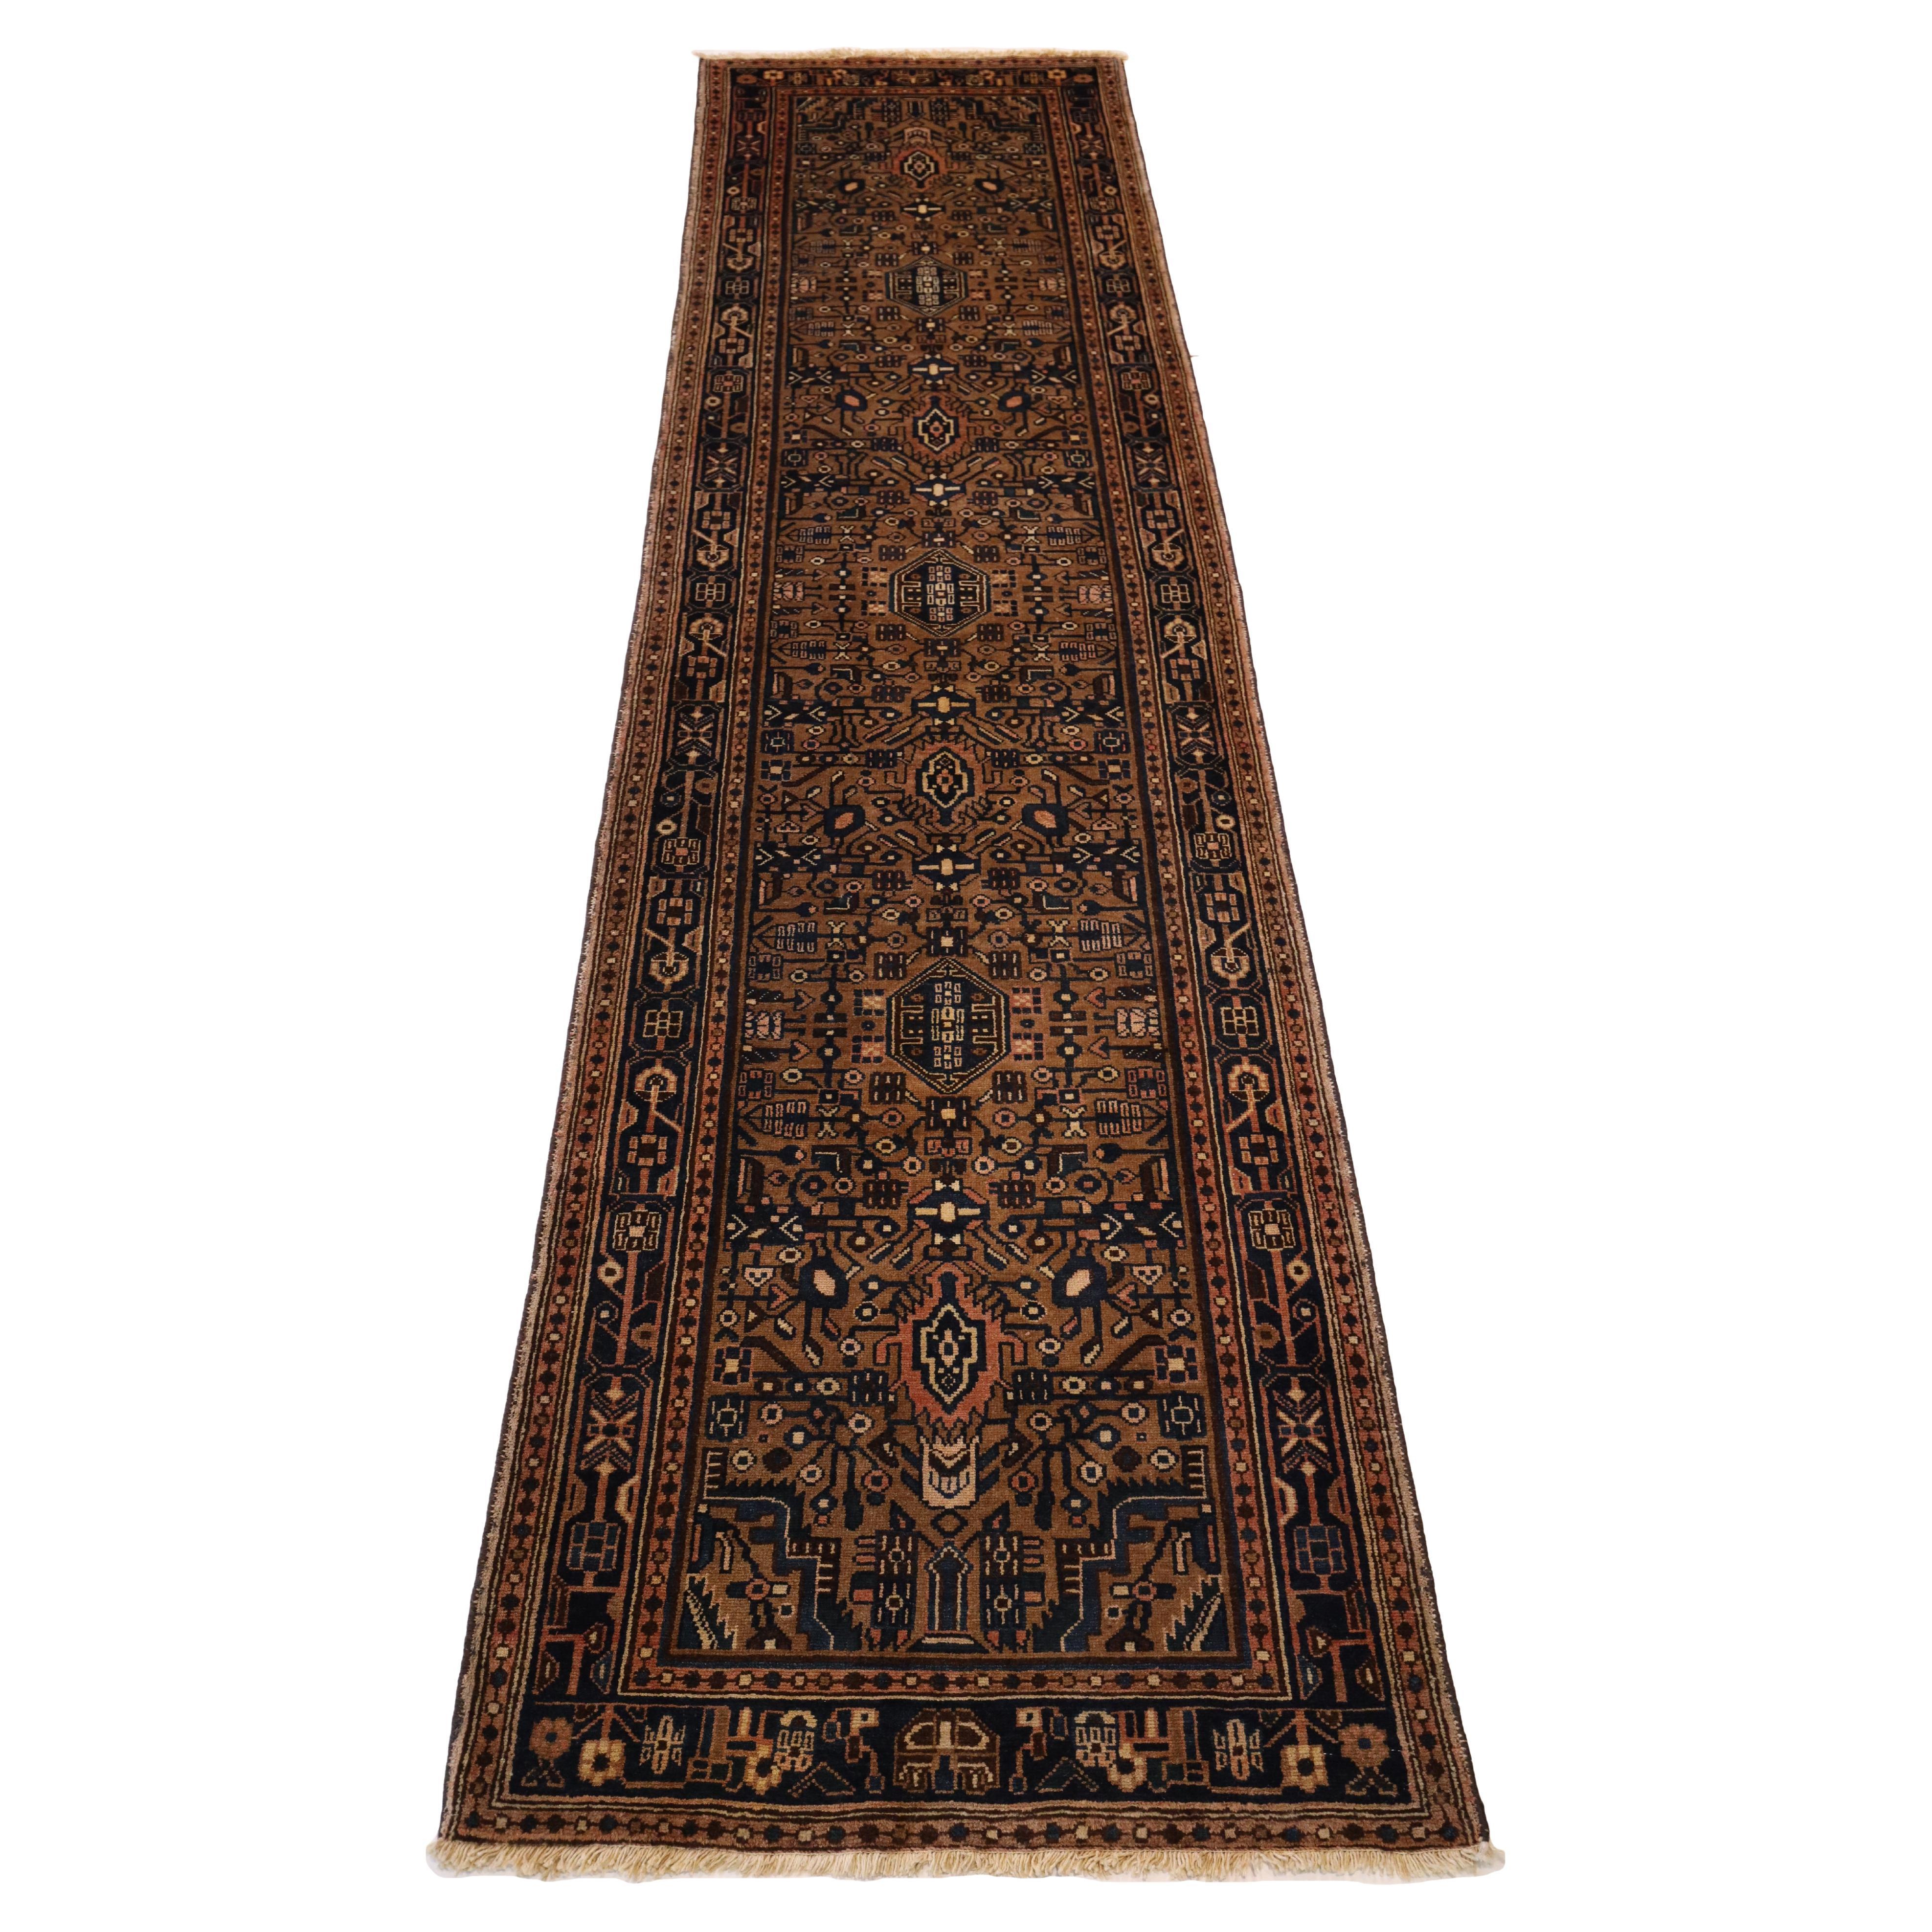 North-West Persian runner - 3'6" x 12'9" For Sale